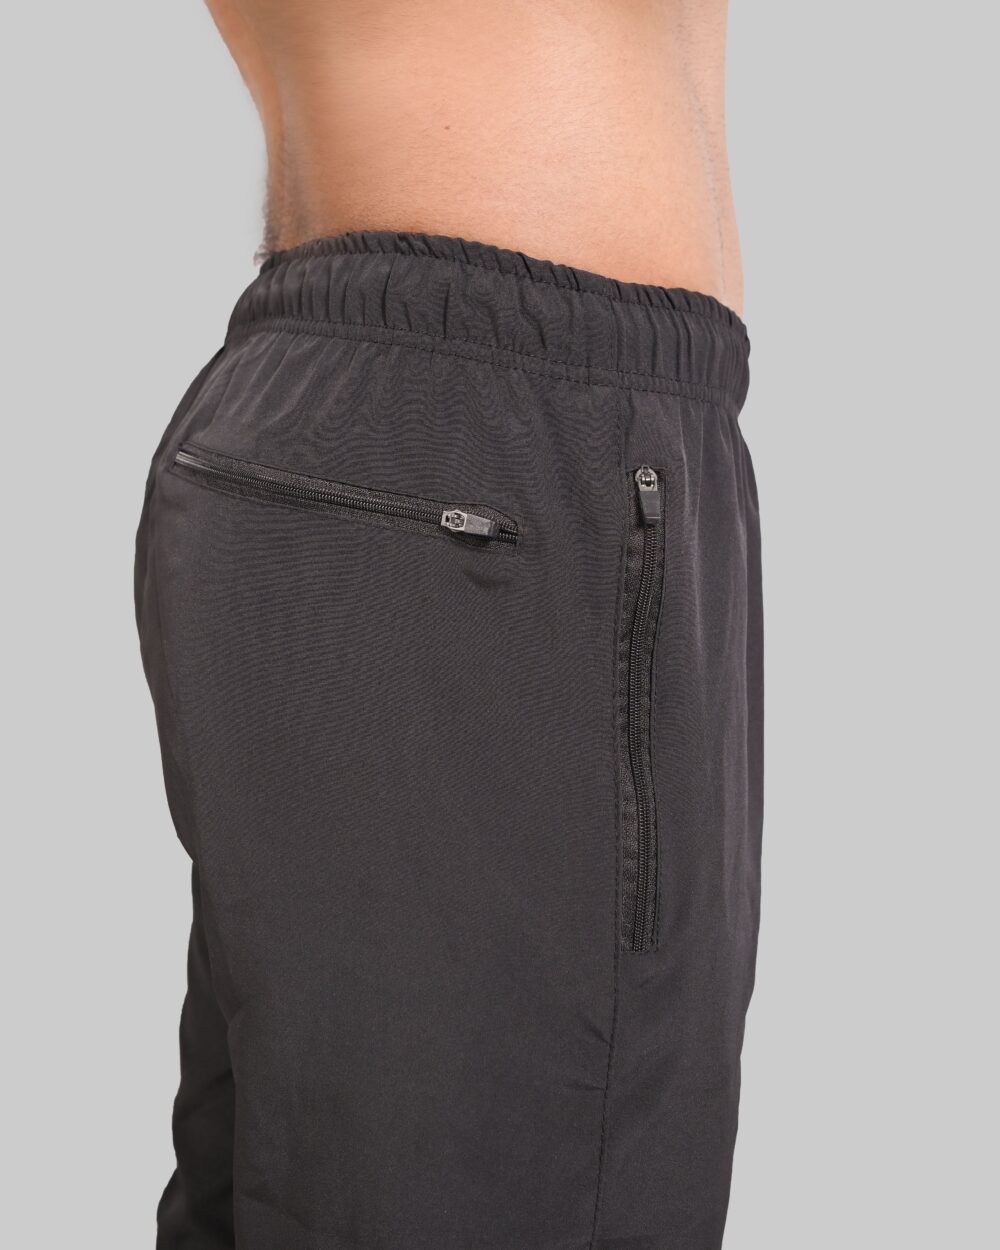 Wolf Trouser 3.0 (BLACK) - Stag Clothing